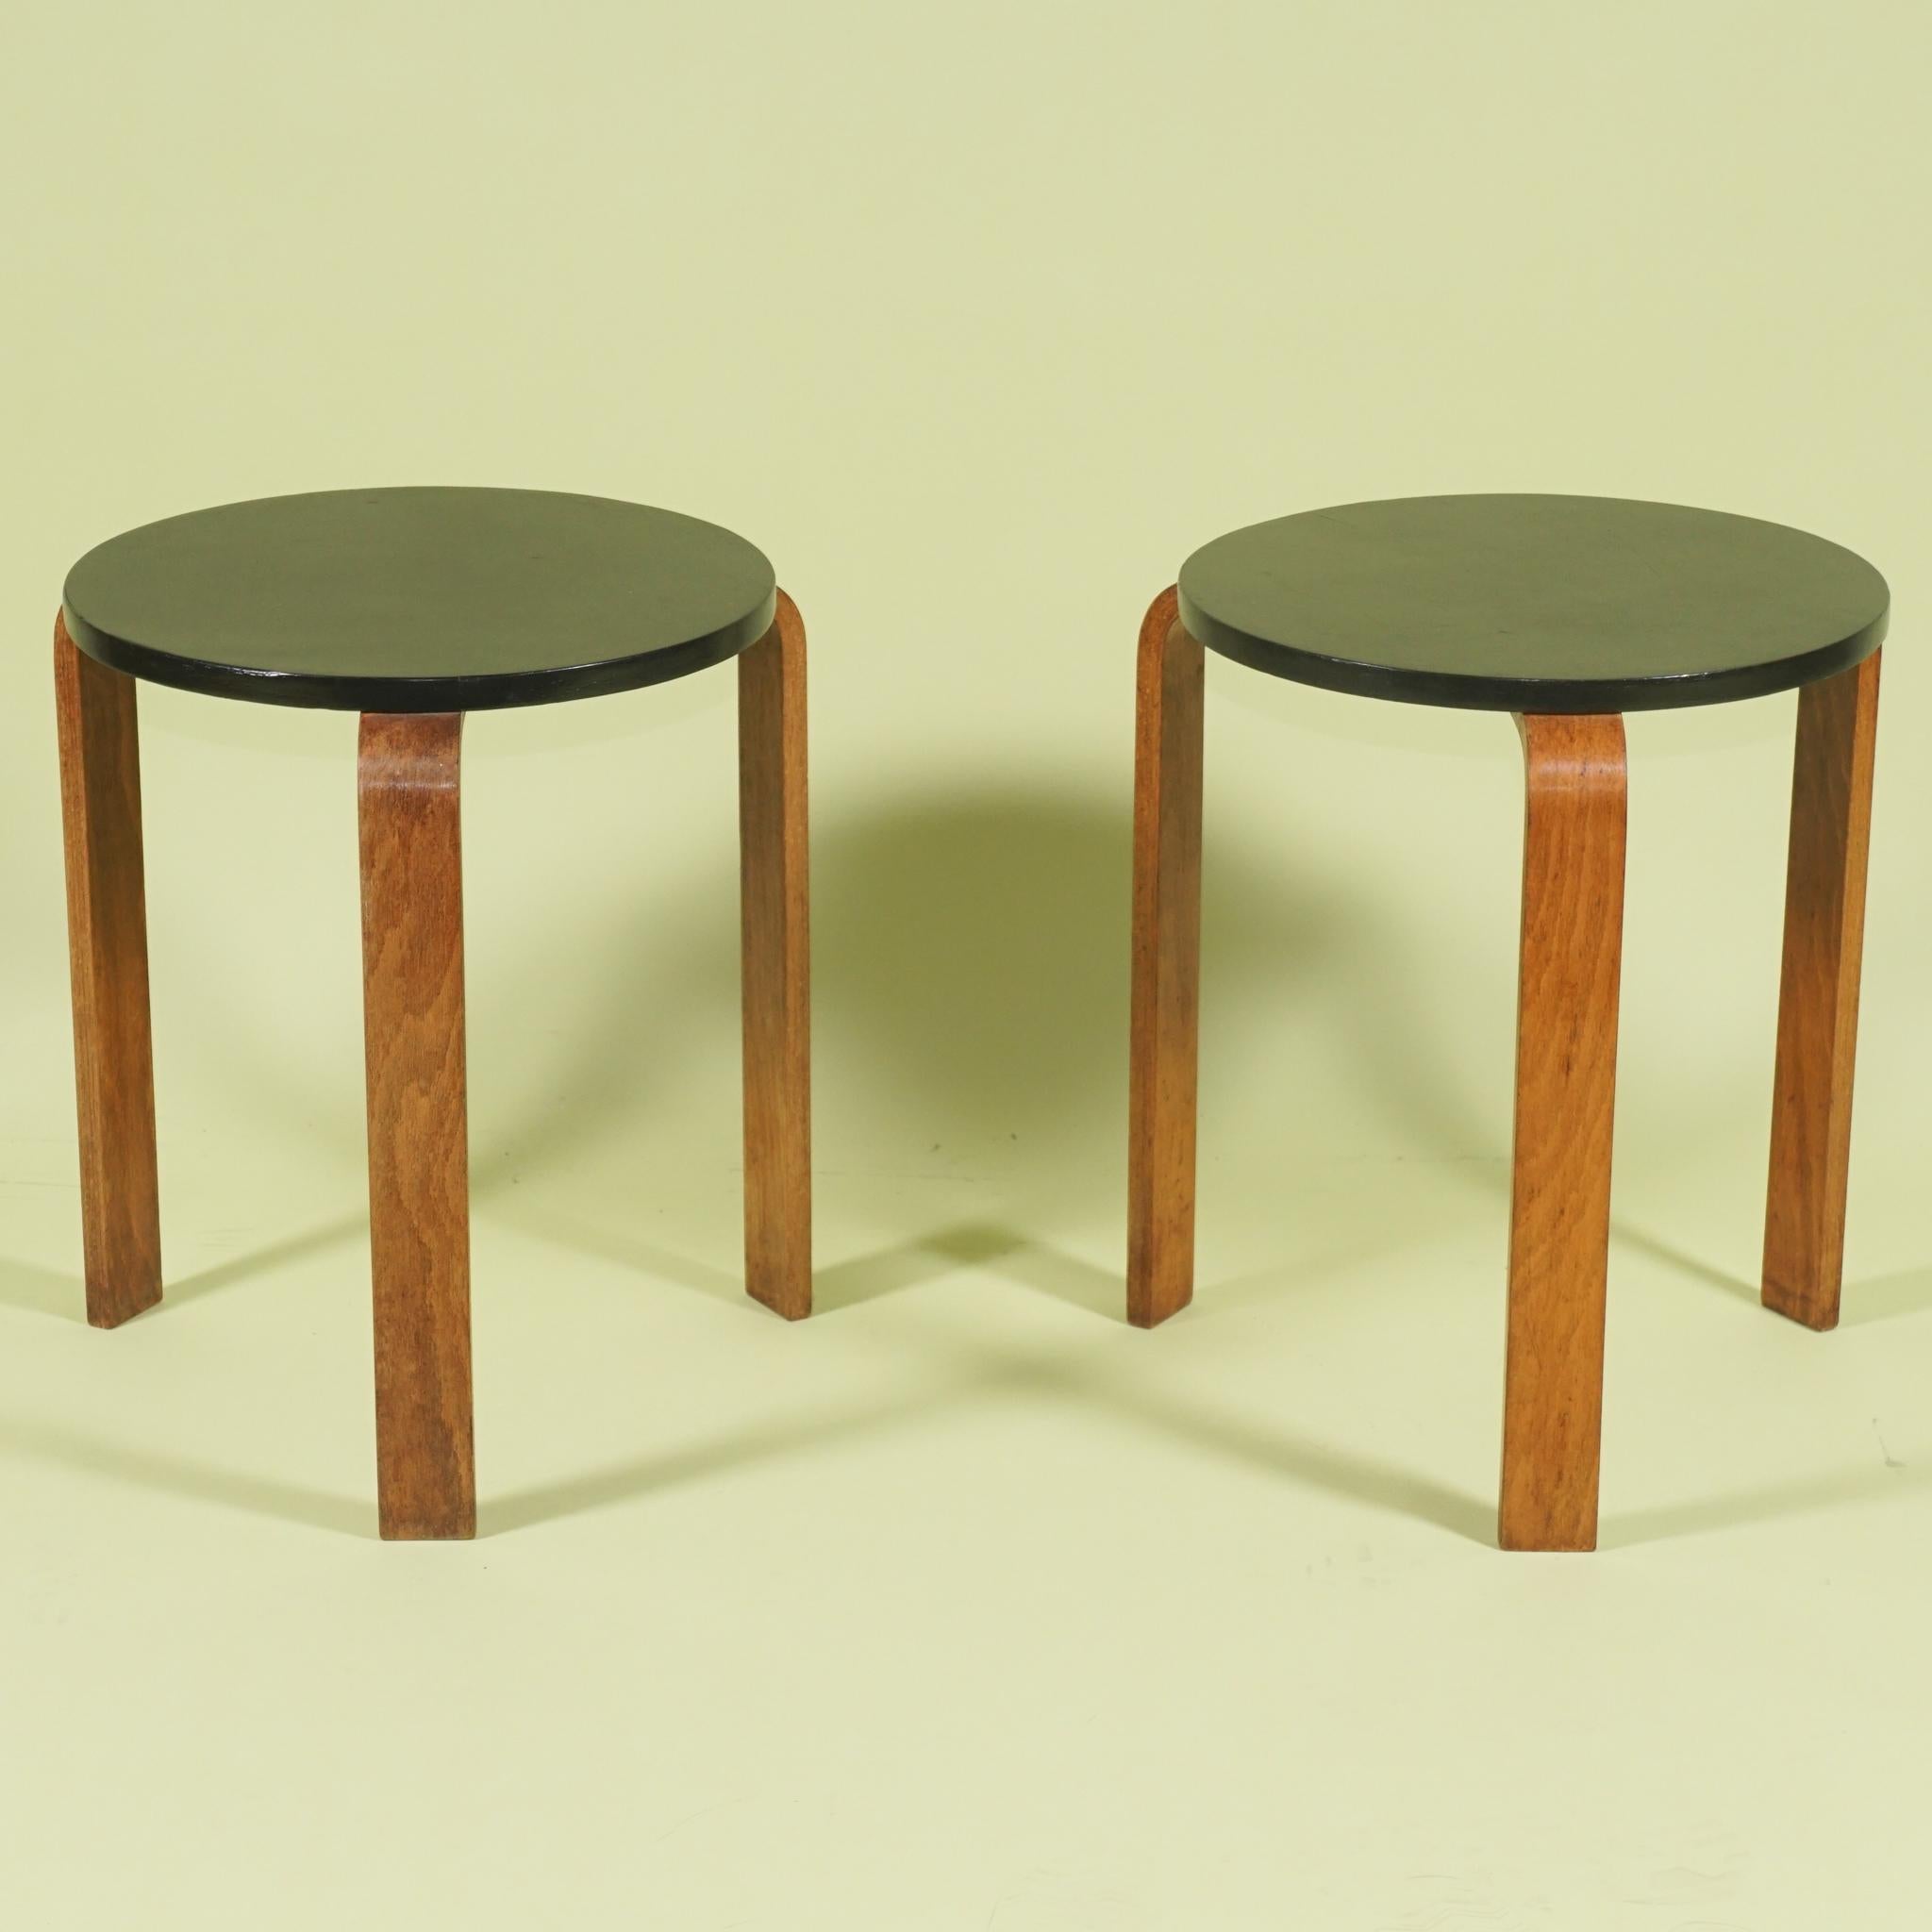 This pair of vintage 3-legged low stools or tables from the designer Alvar Aalto were first introduced in the 1930s. Both made circa 1955 and clearly having always lived their life together are designed to stake and are in good original condition